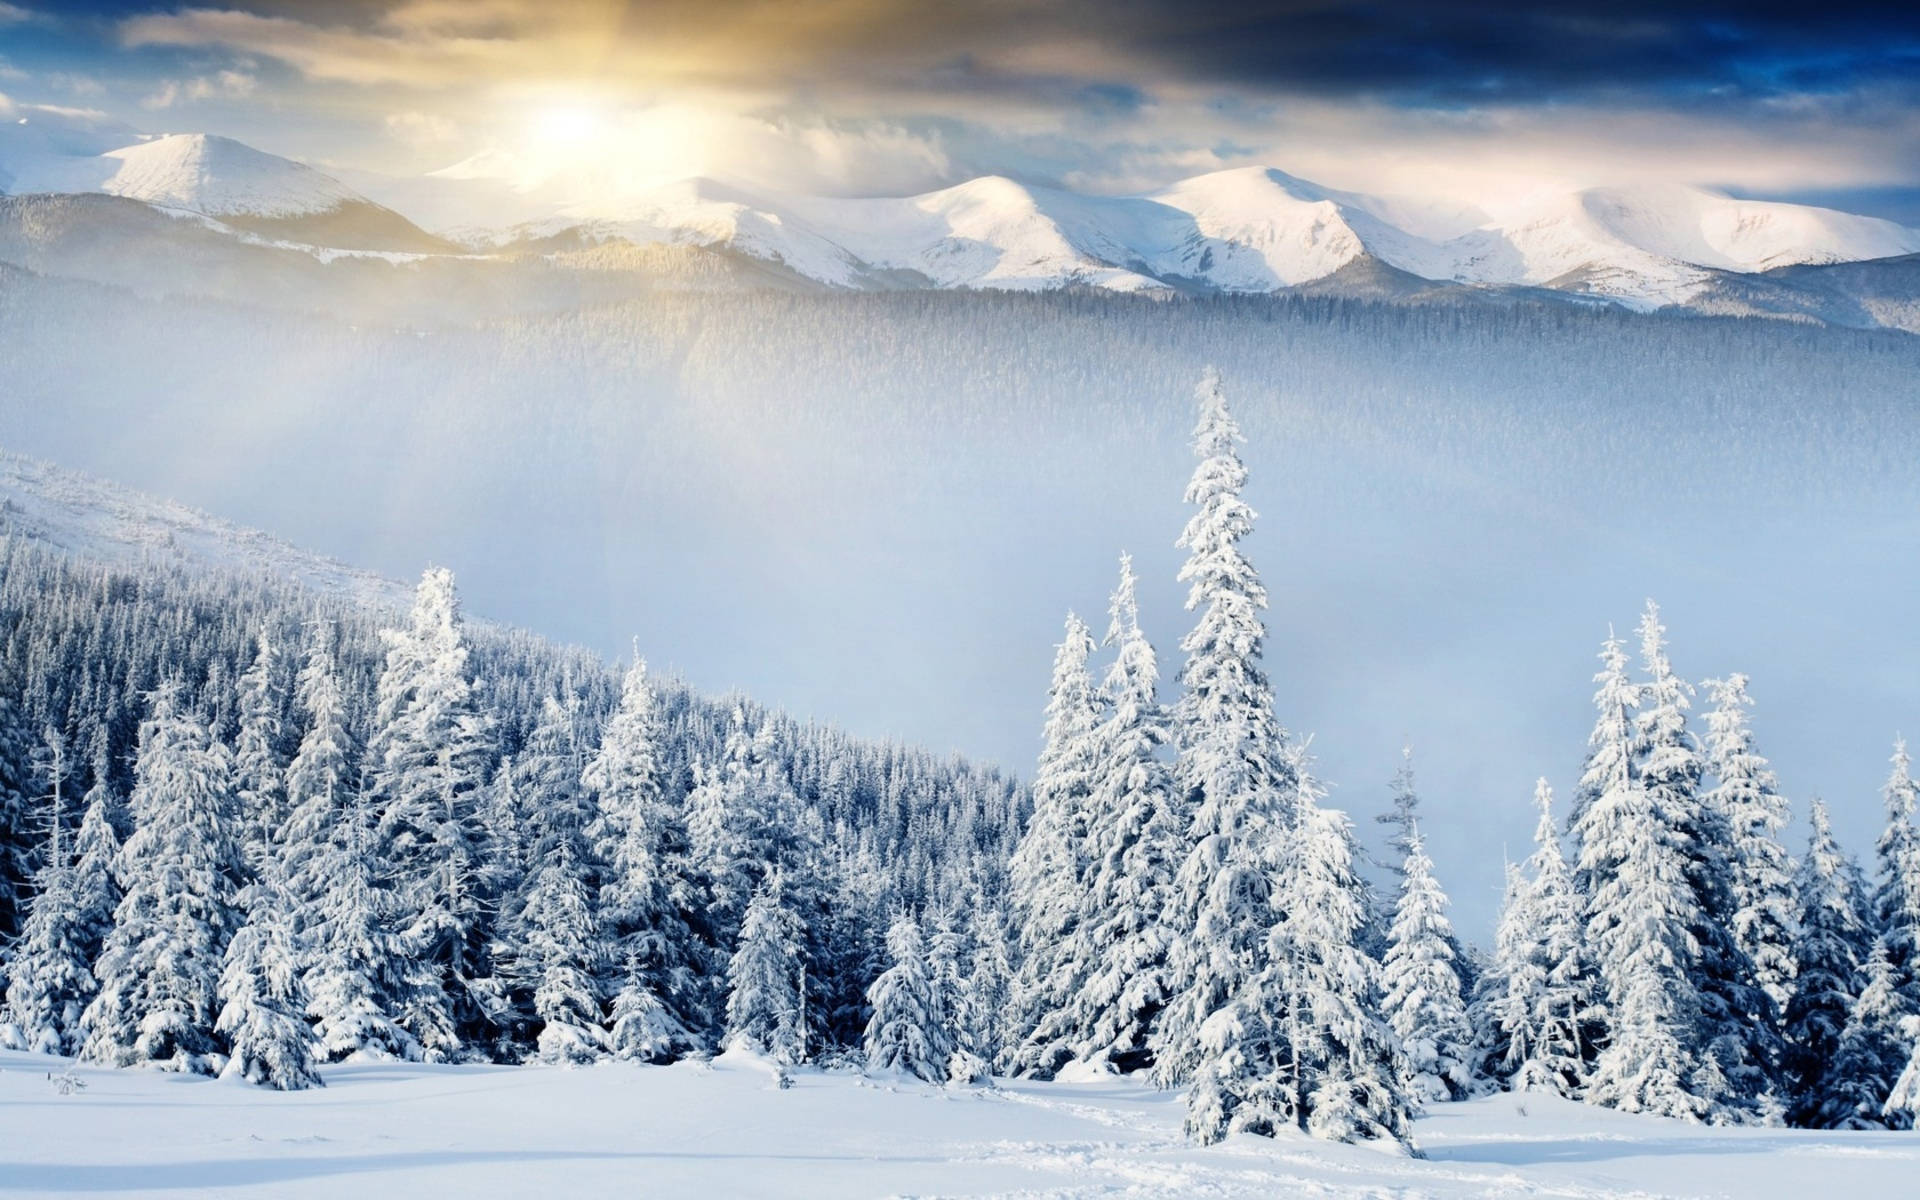 "A Bright Sunny Winter Day at the Mountainous Forest" Wallpaper